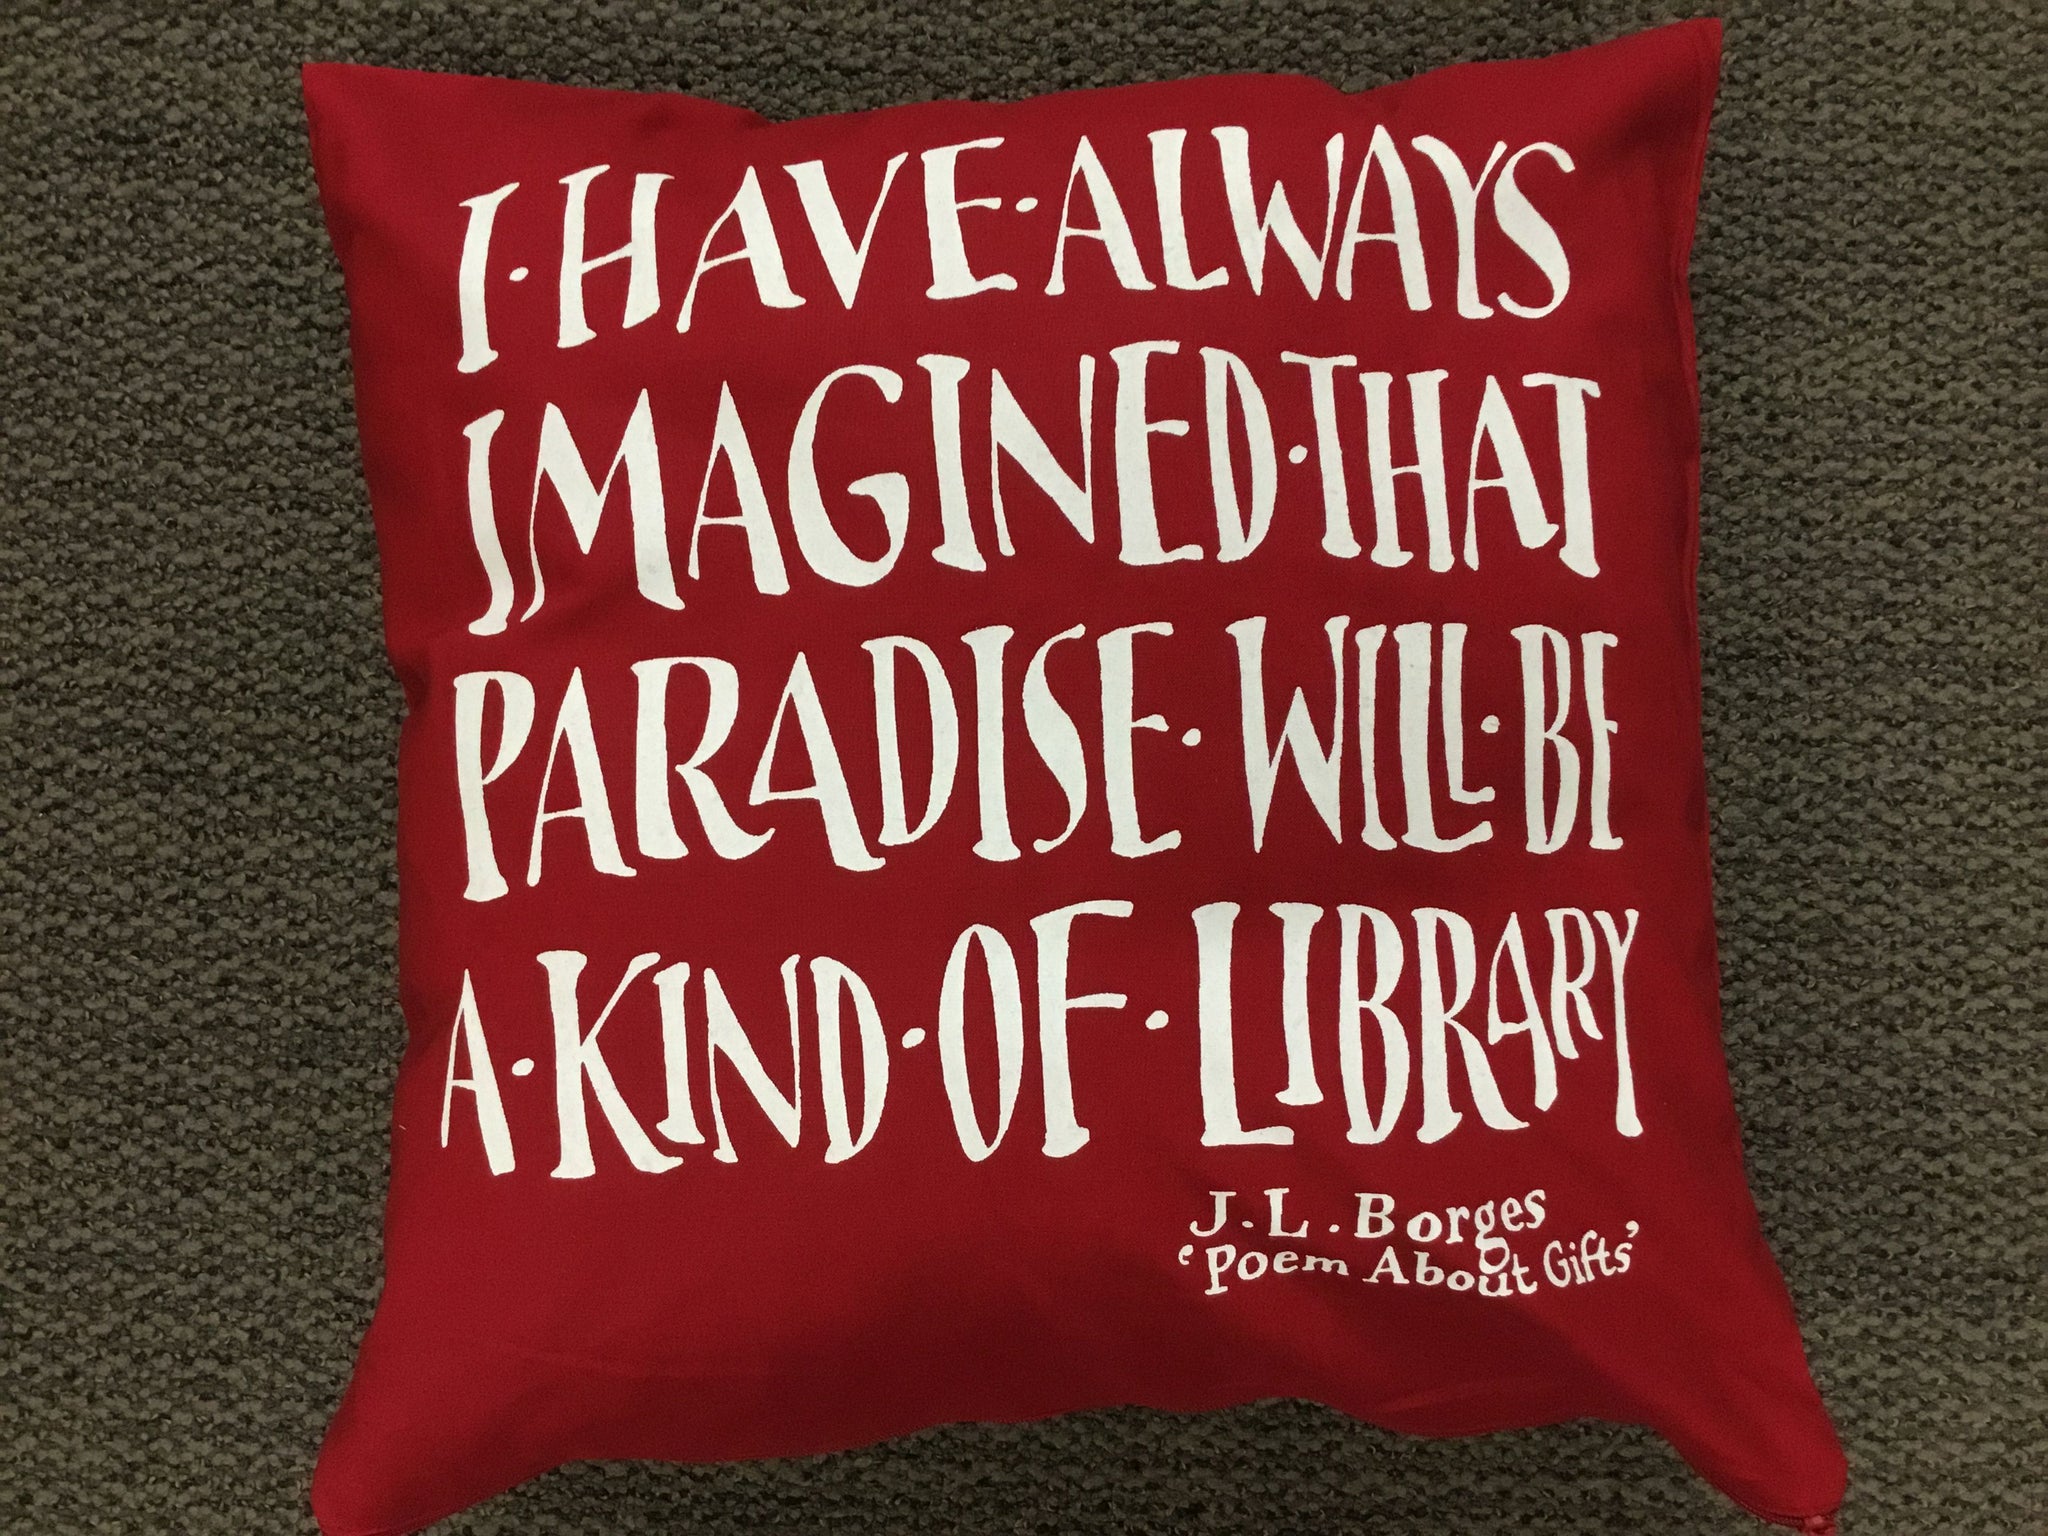 'Poem about Gifts by J. L Borges' Cushion